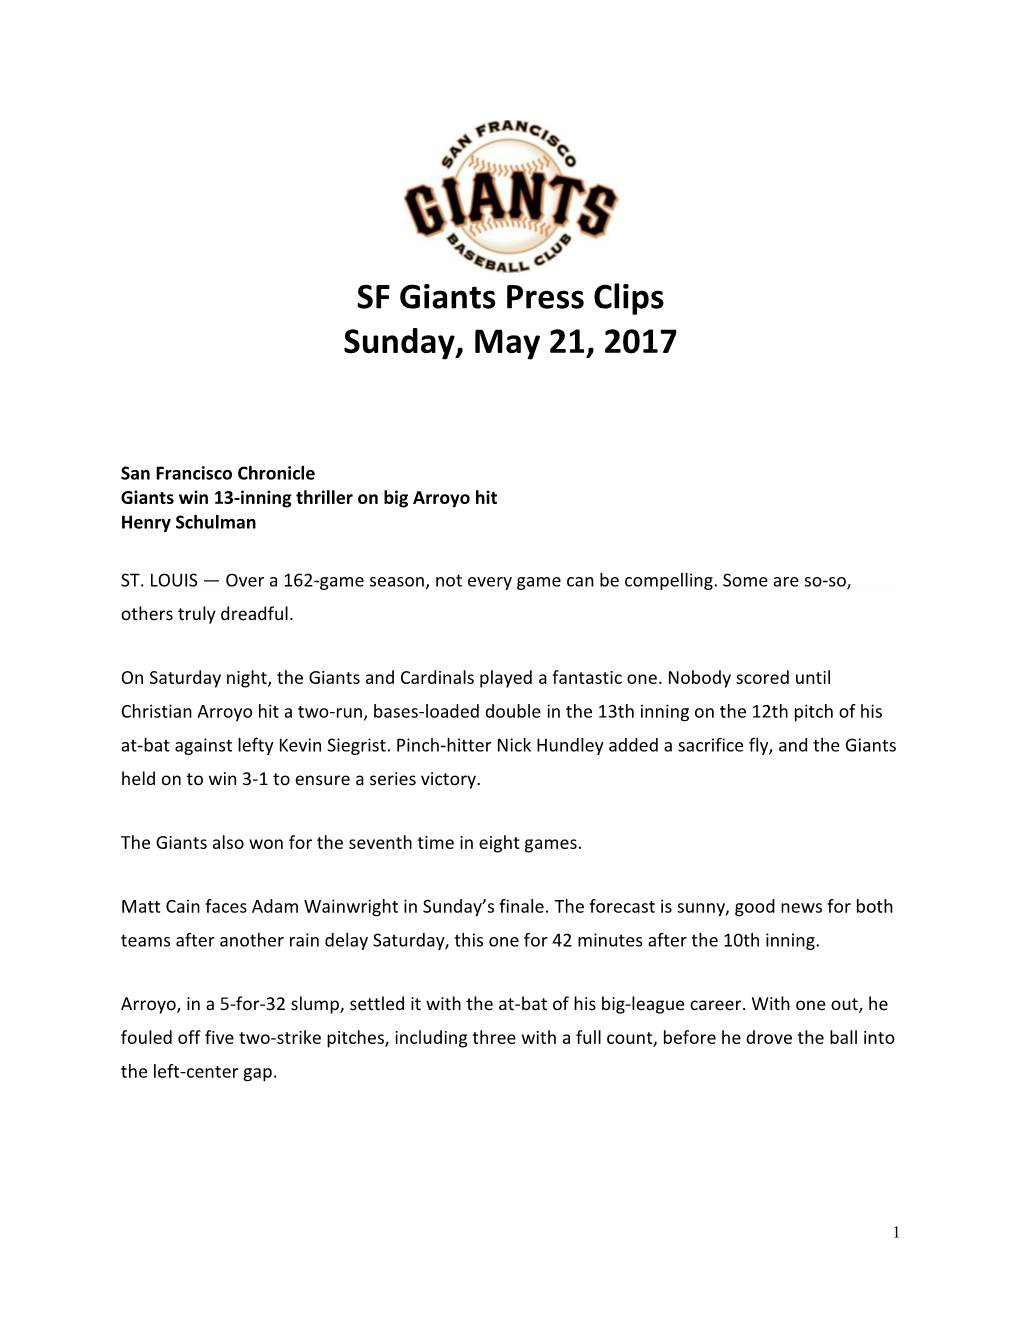 SF Giants Press Clips Sunday, May 21, 2017